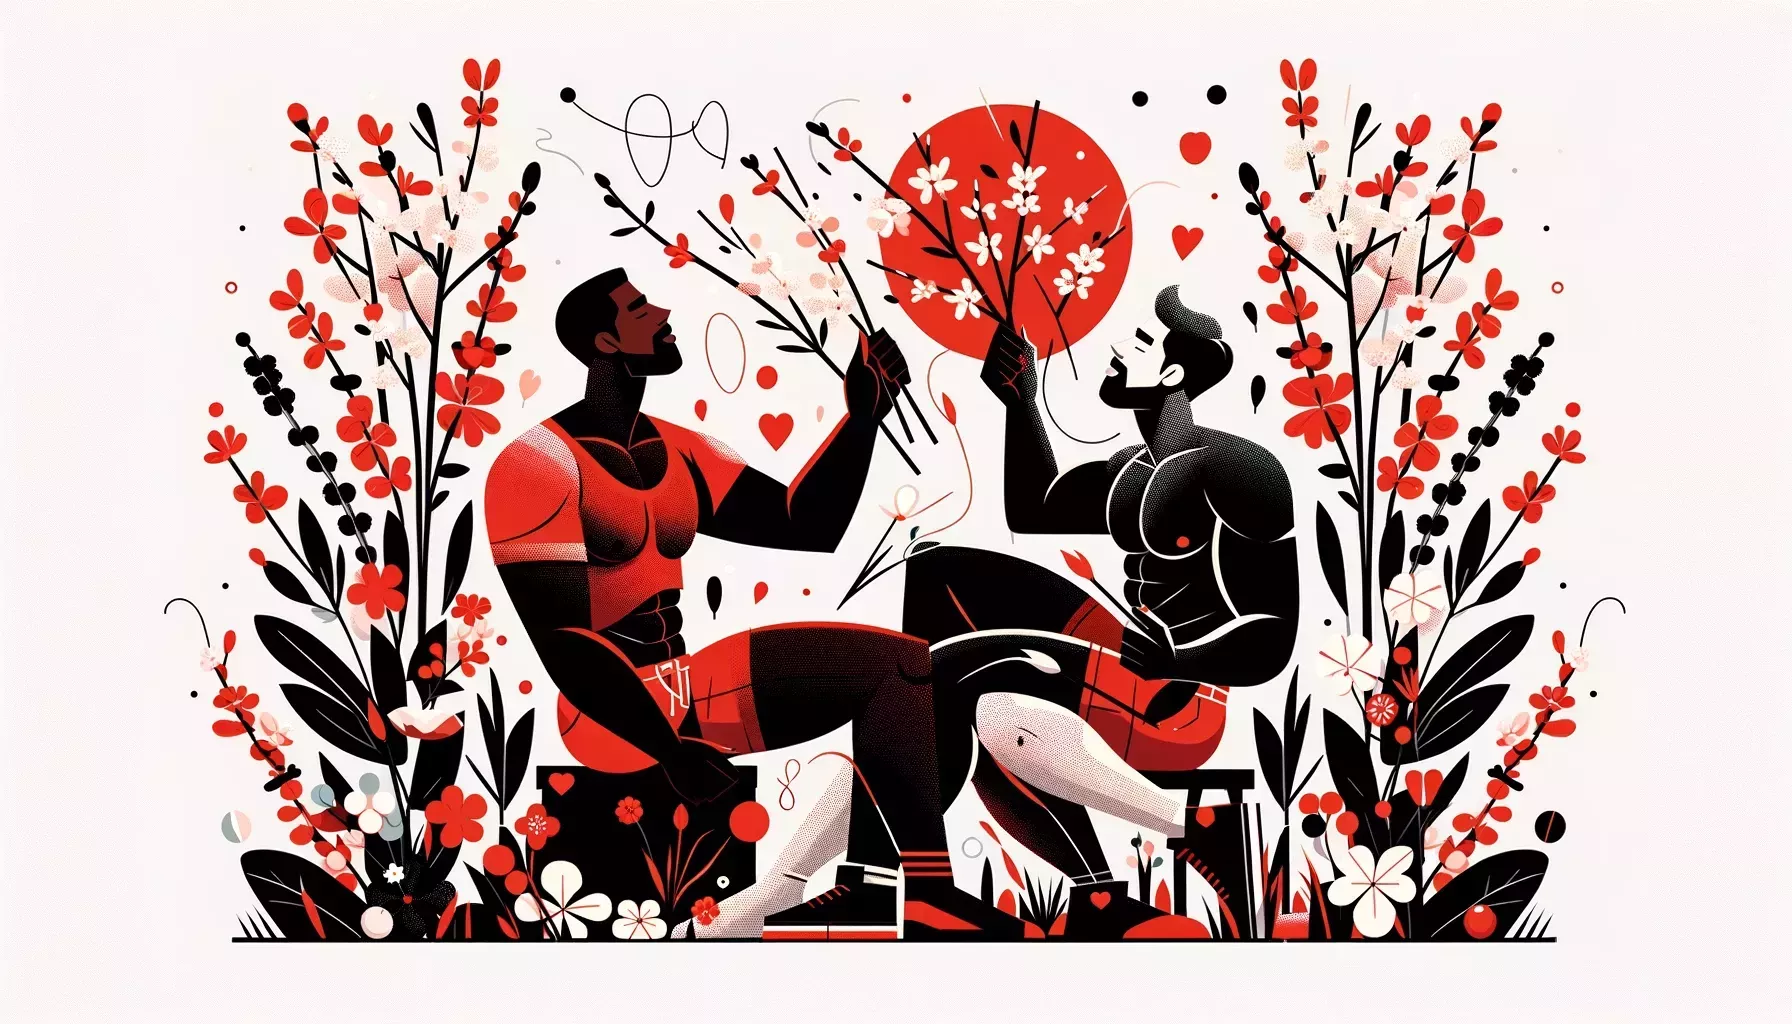 An illustration of two gay men enjoy a springtime date together, surrounded by blooming flowers and foliage.